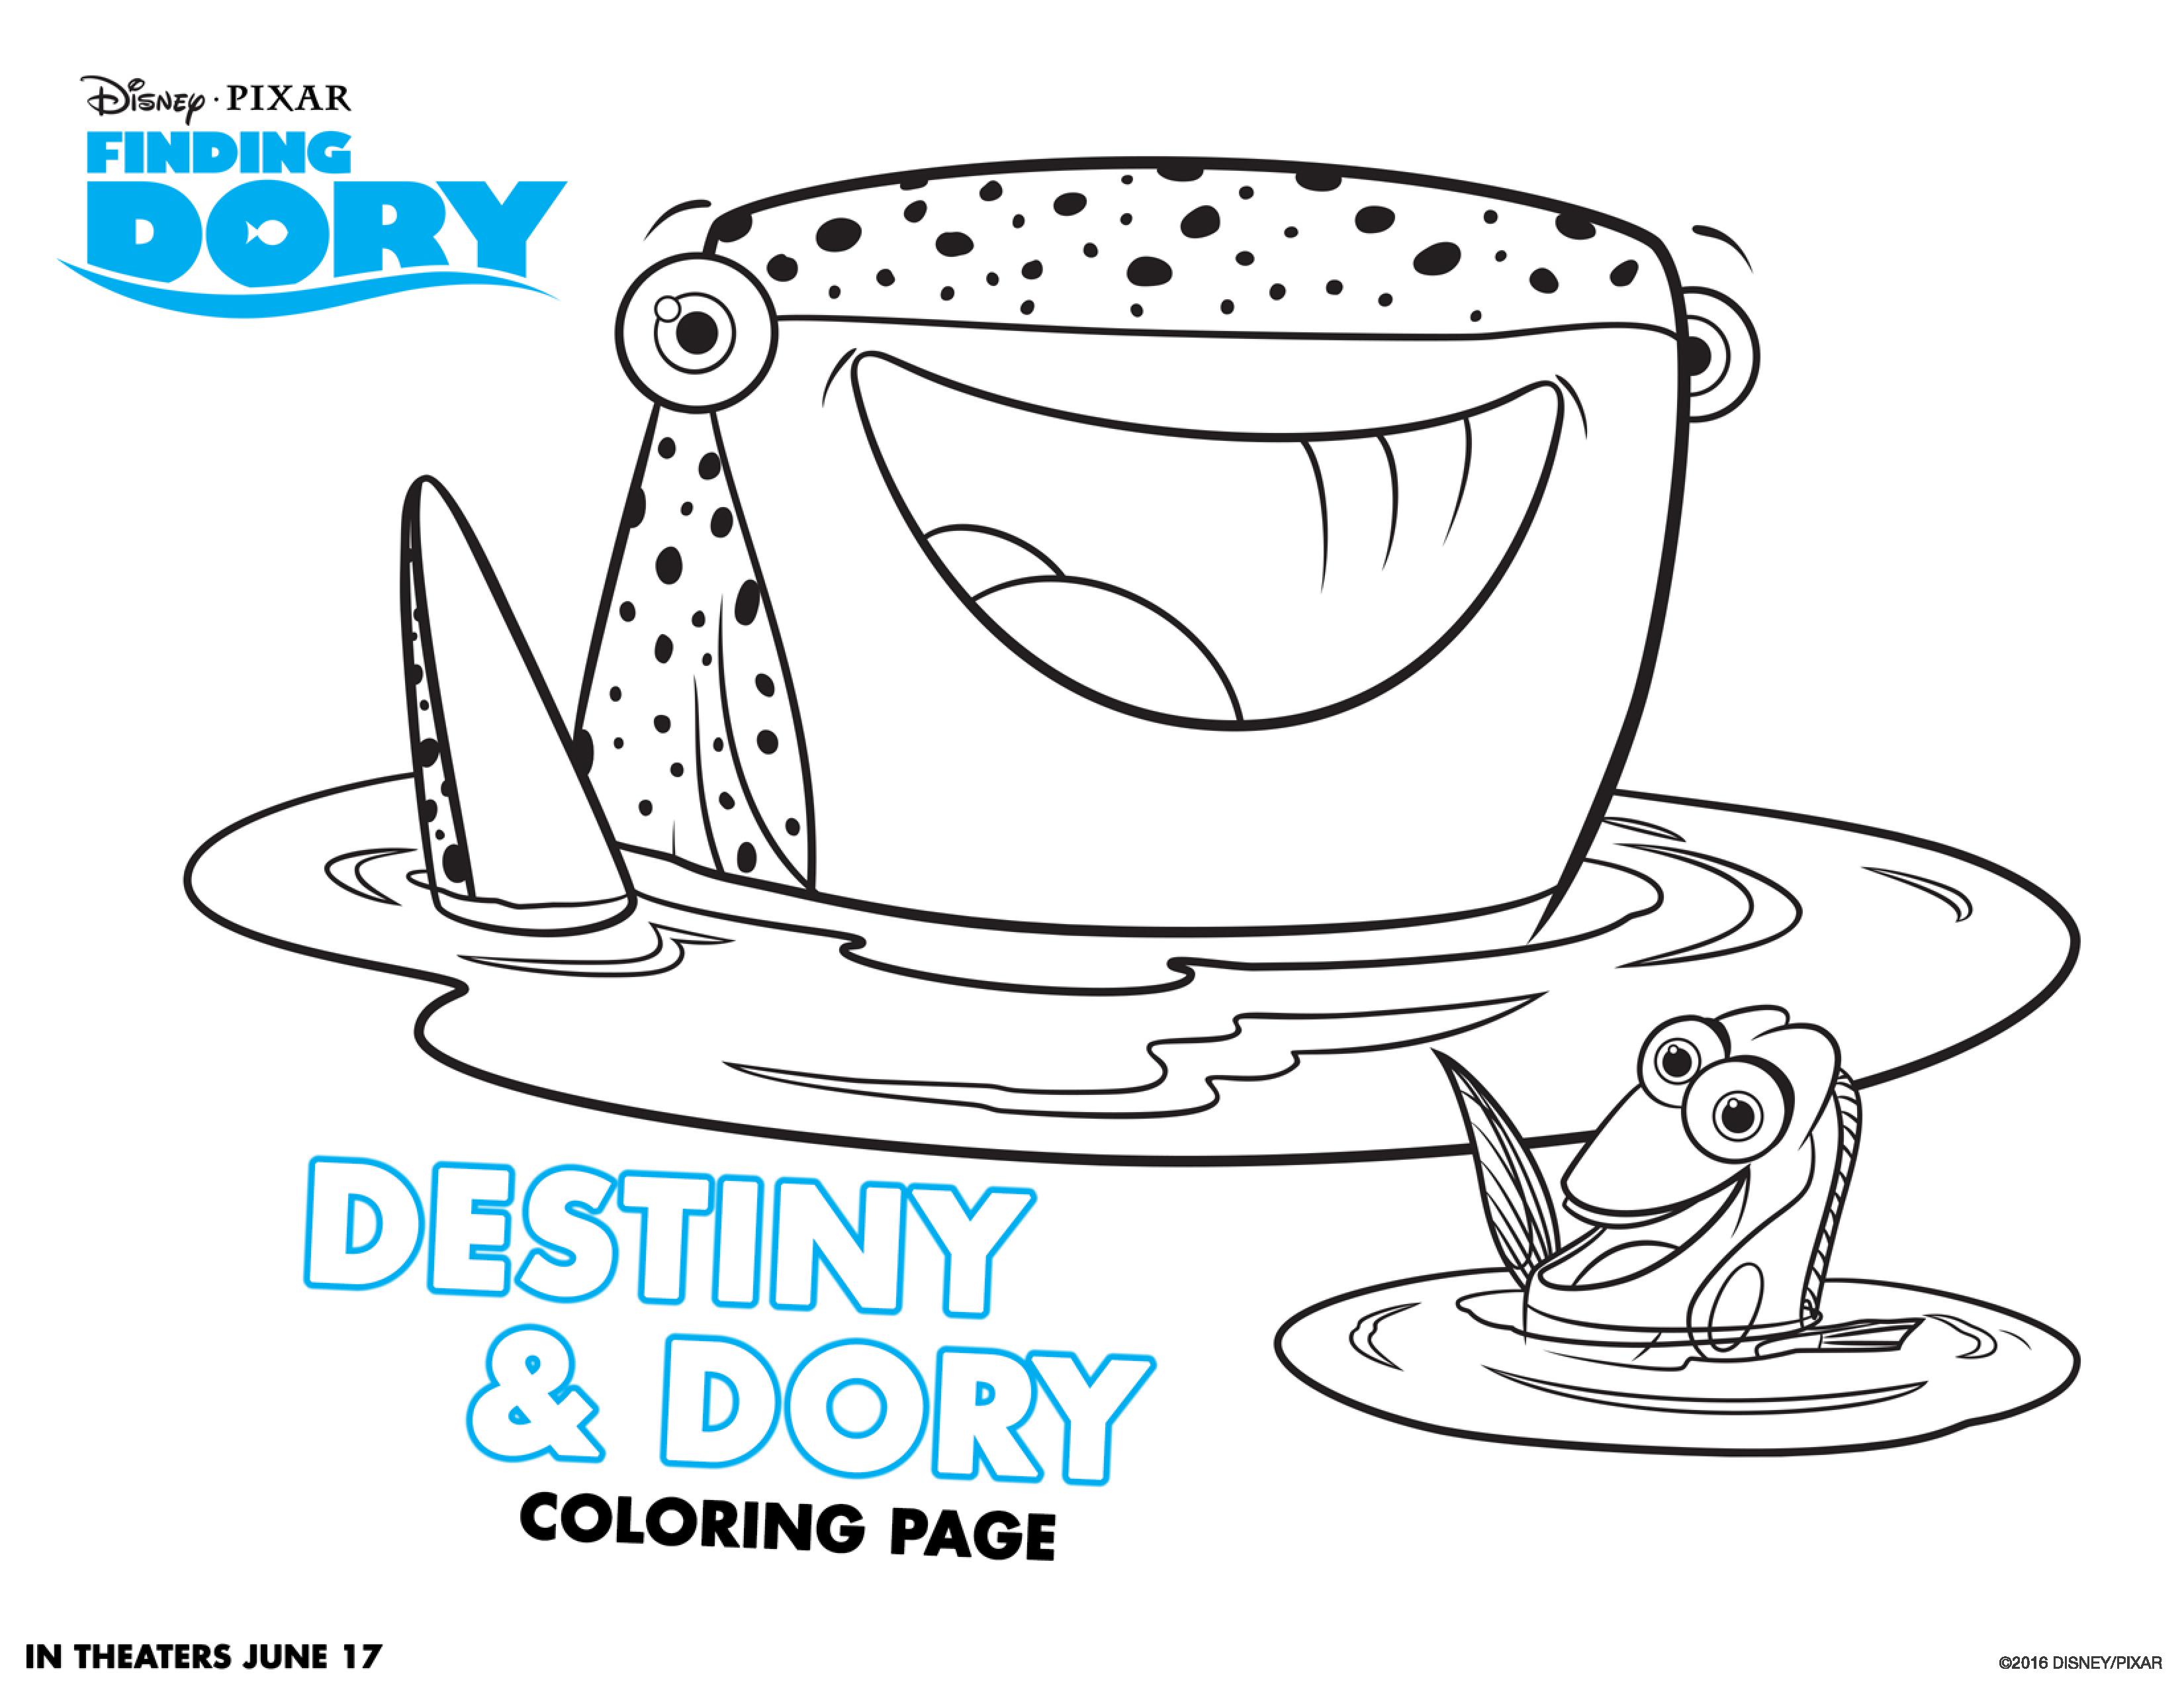 Destiny and Dory Coloring Page